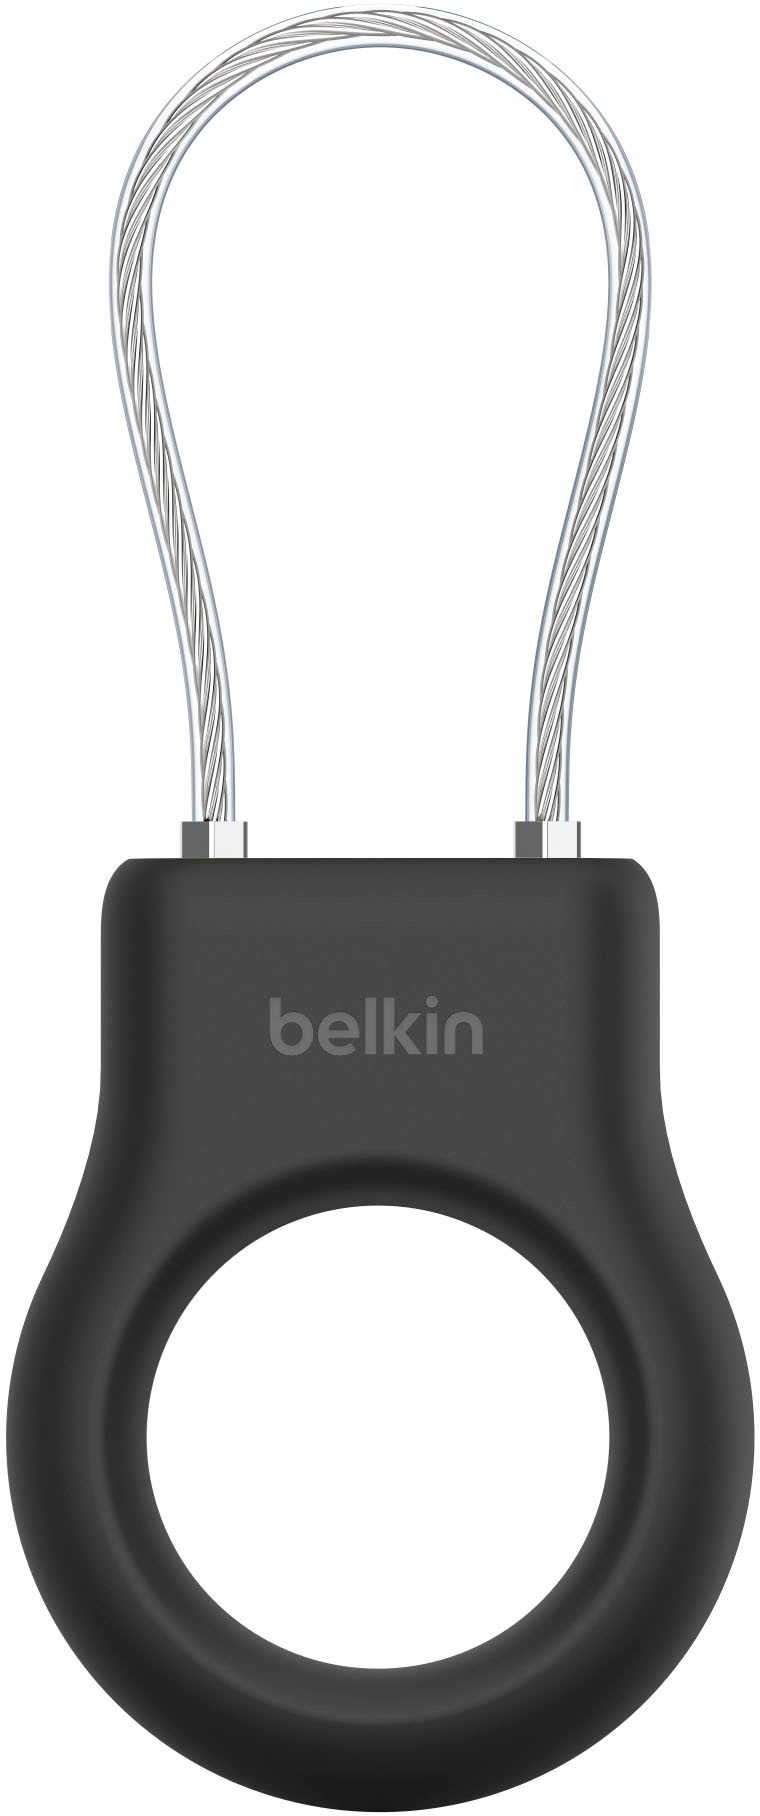 Belkin's now $9.50 AirTag Case with strap protects your Apple tracker at  new  low